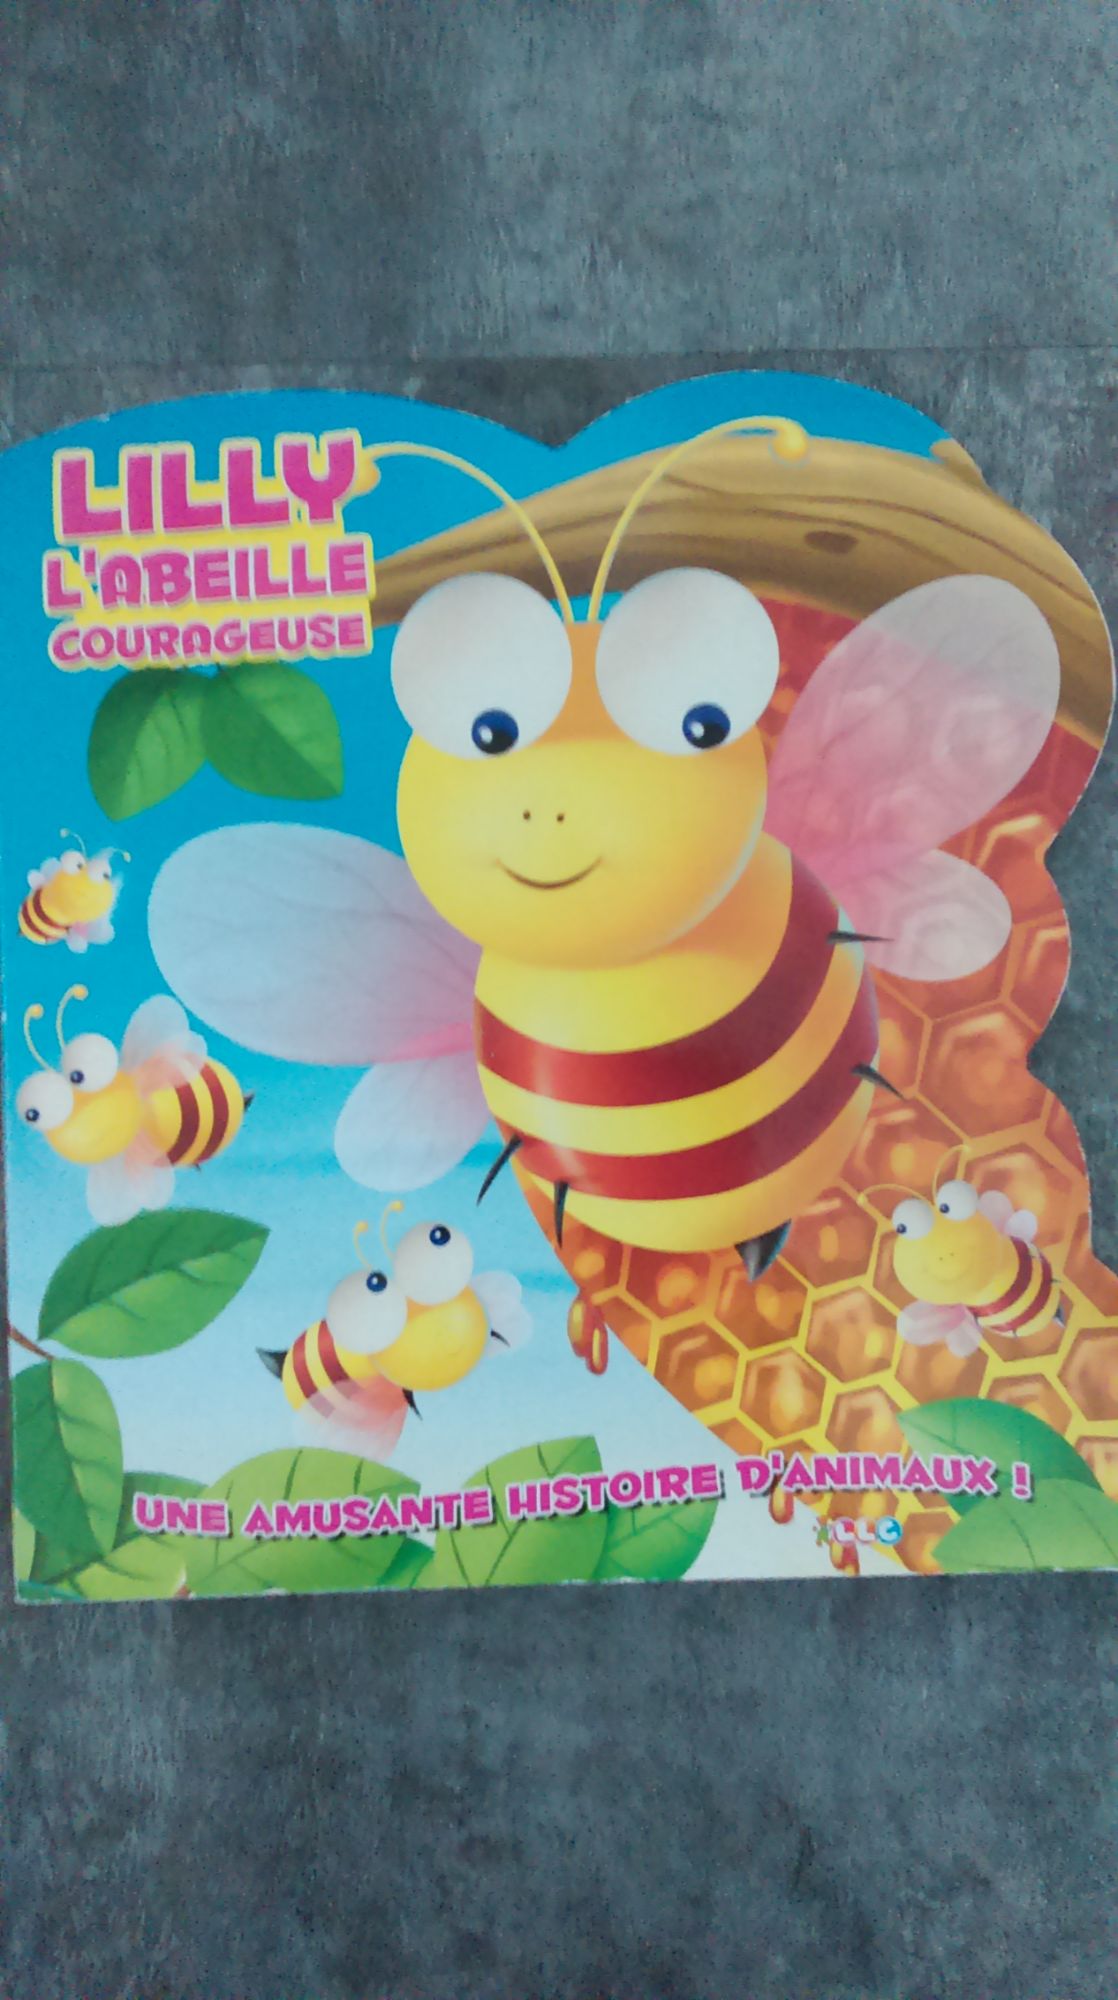 Lilly l'abeille courageuse